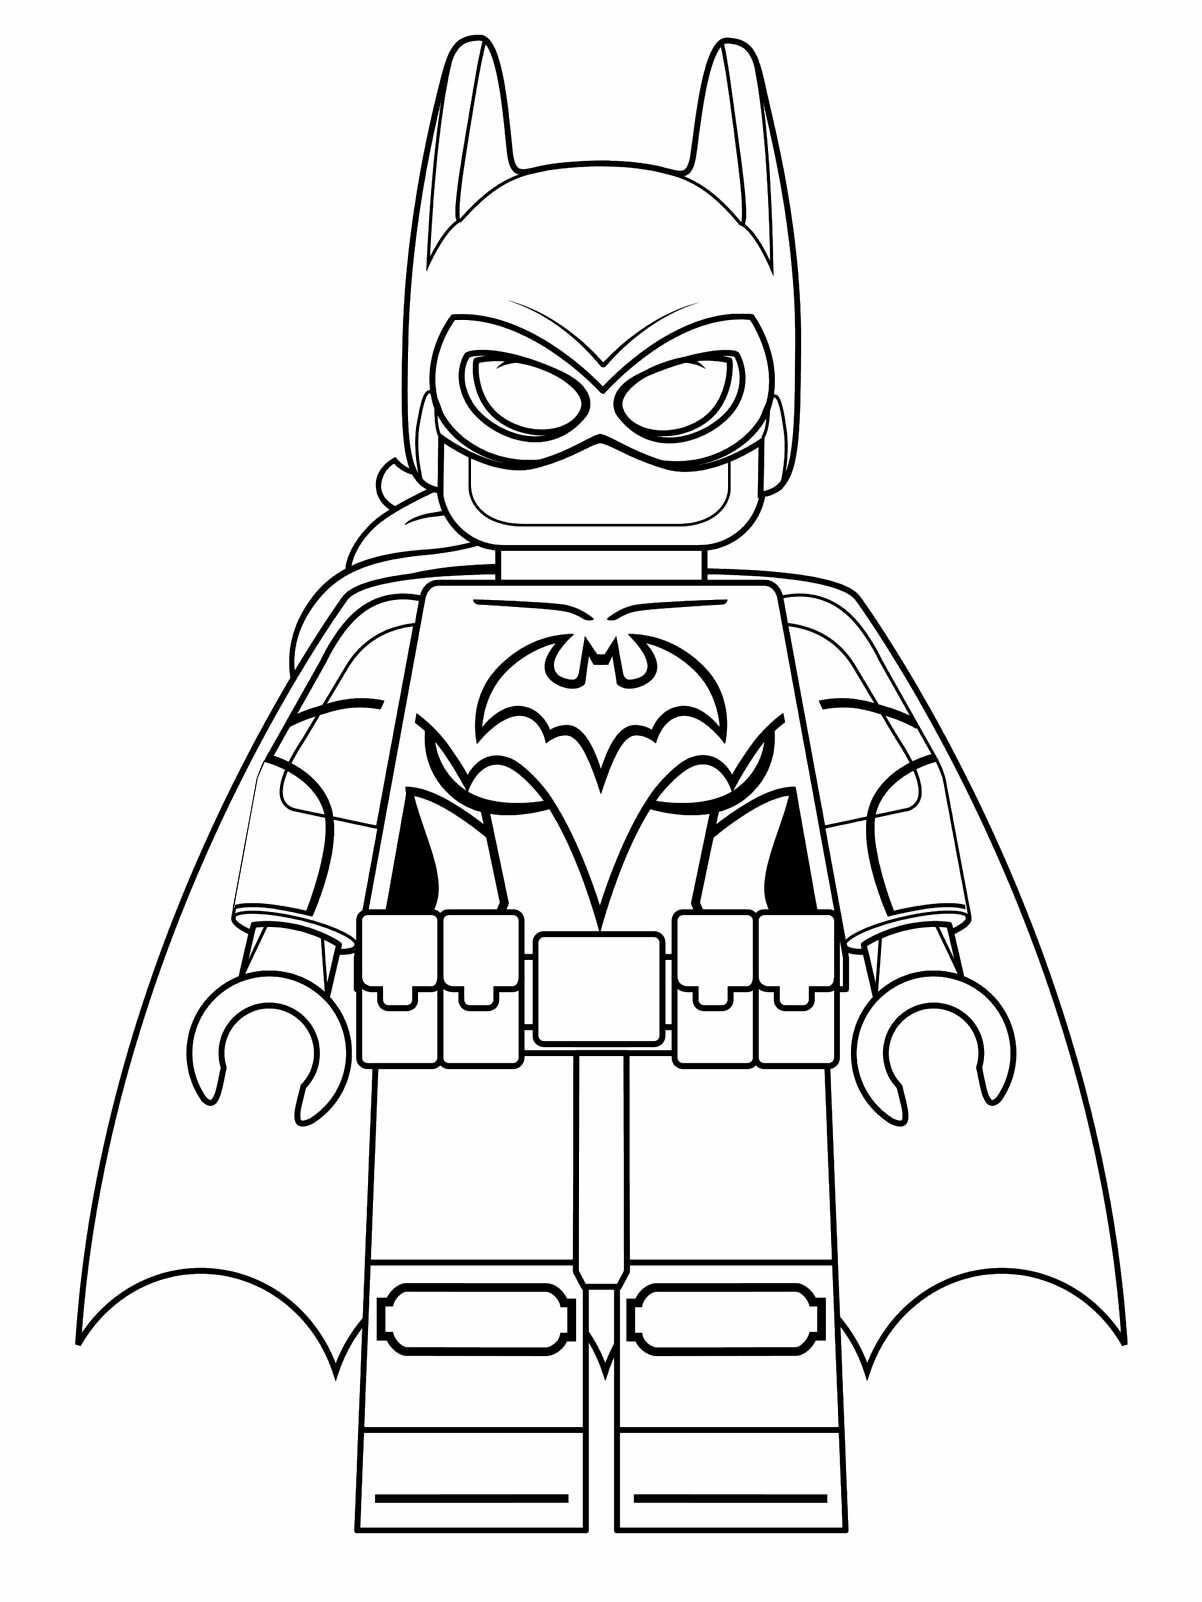 superb 16 coloring pages of lego batman movie on kids n fun on kids terrifying inspirations lego batman coloring pages for kids 